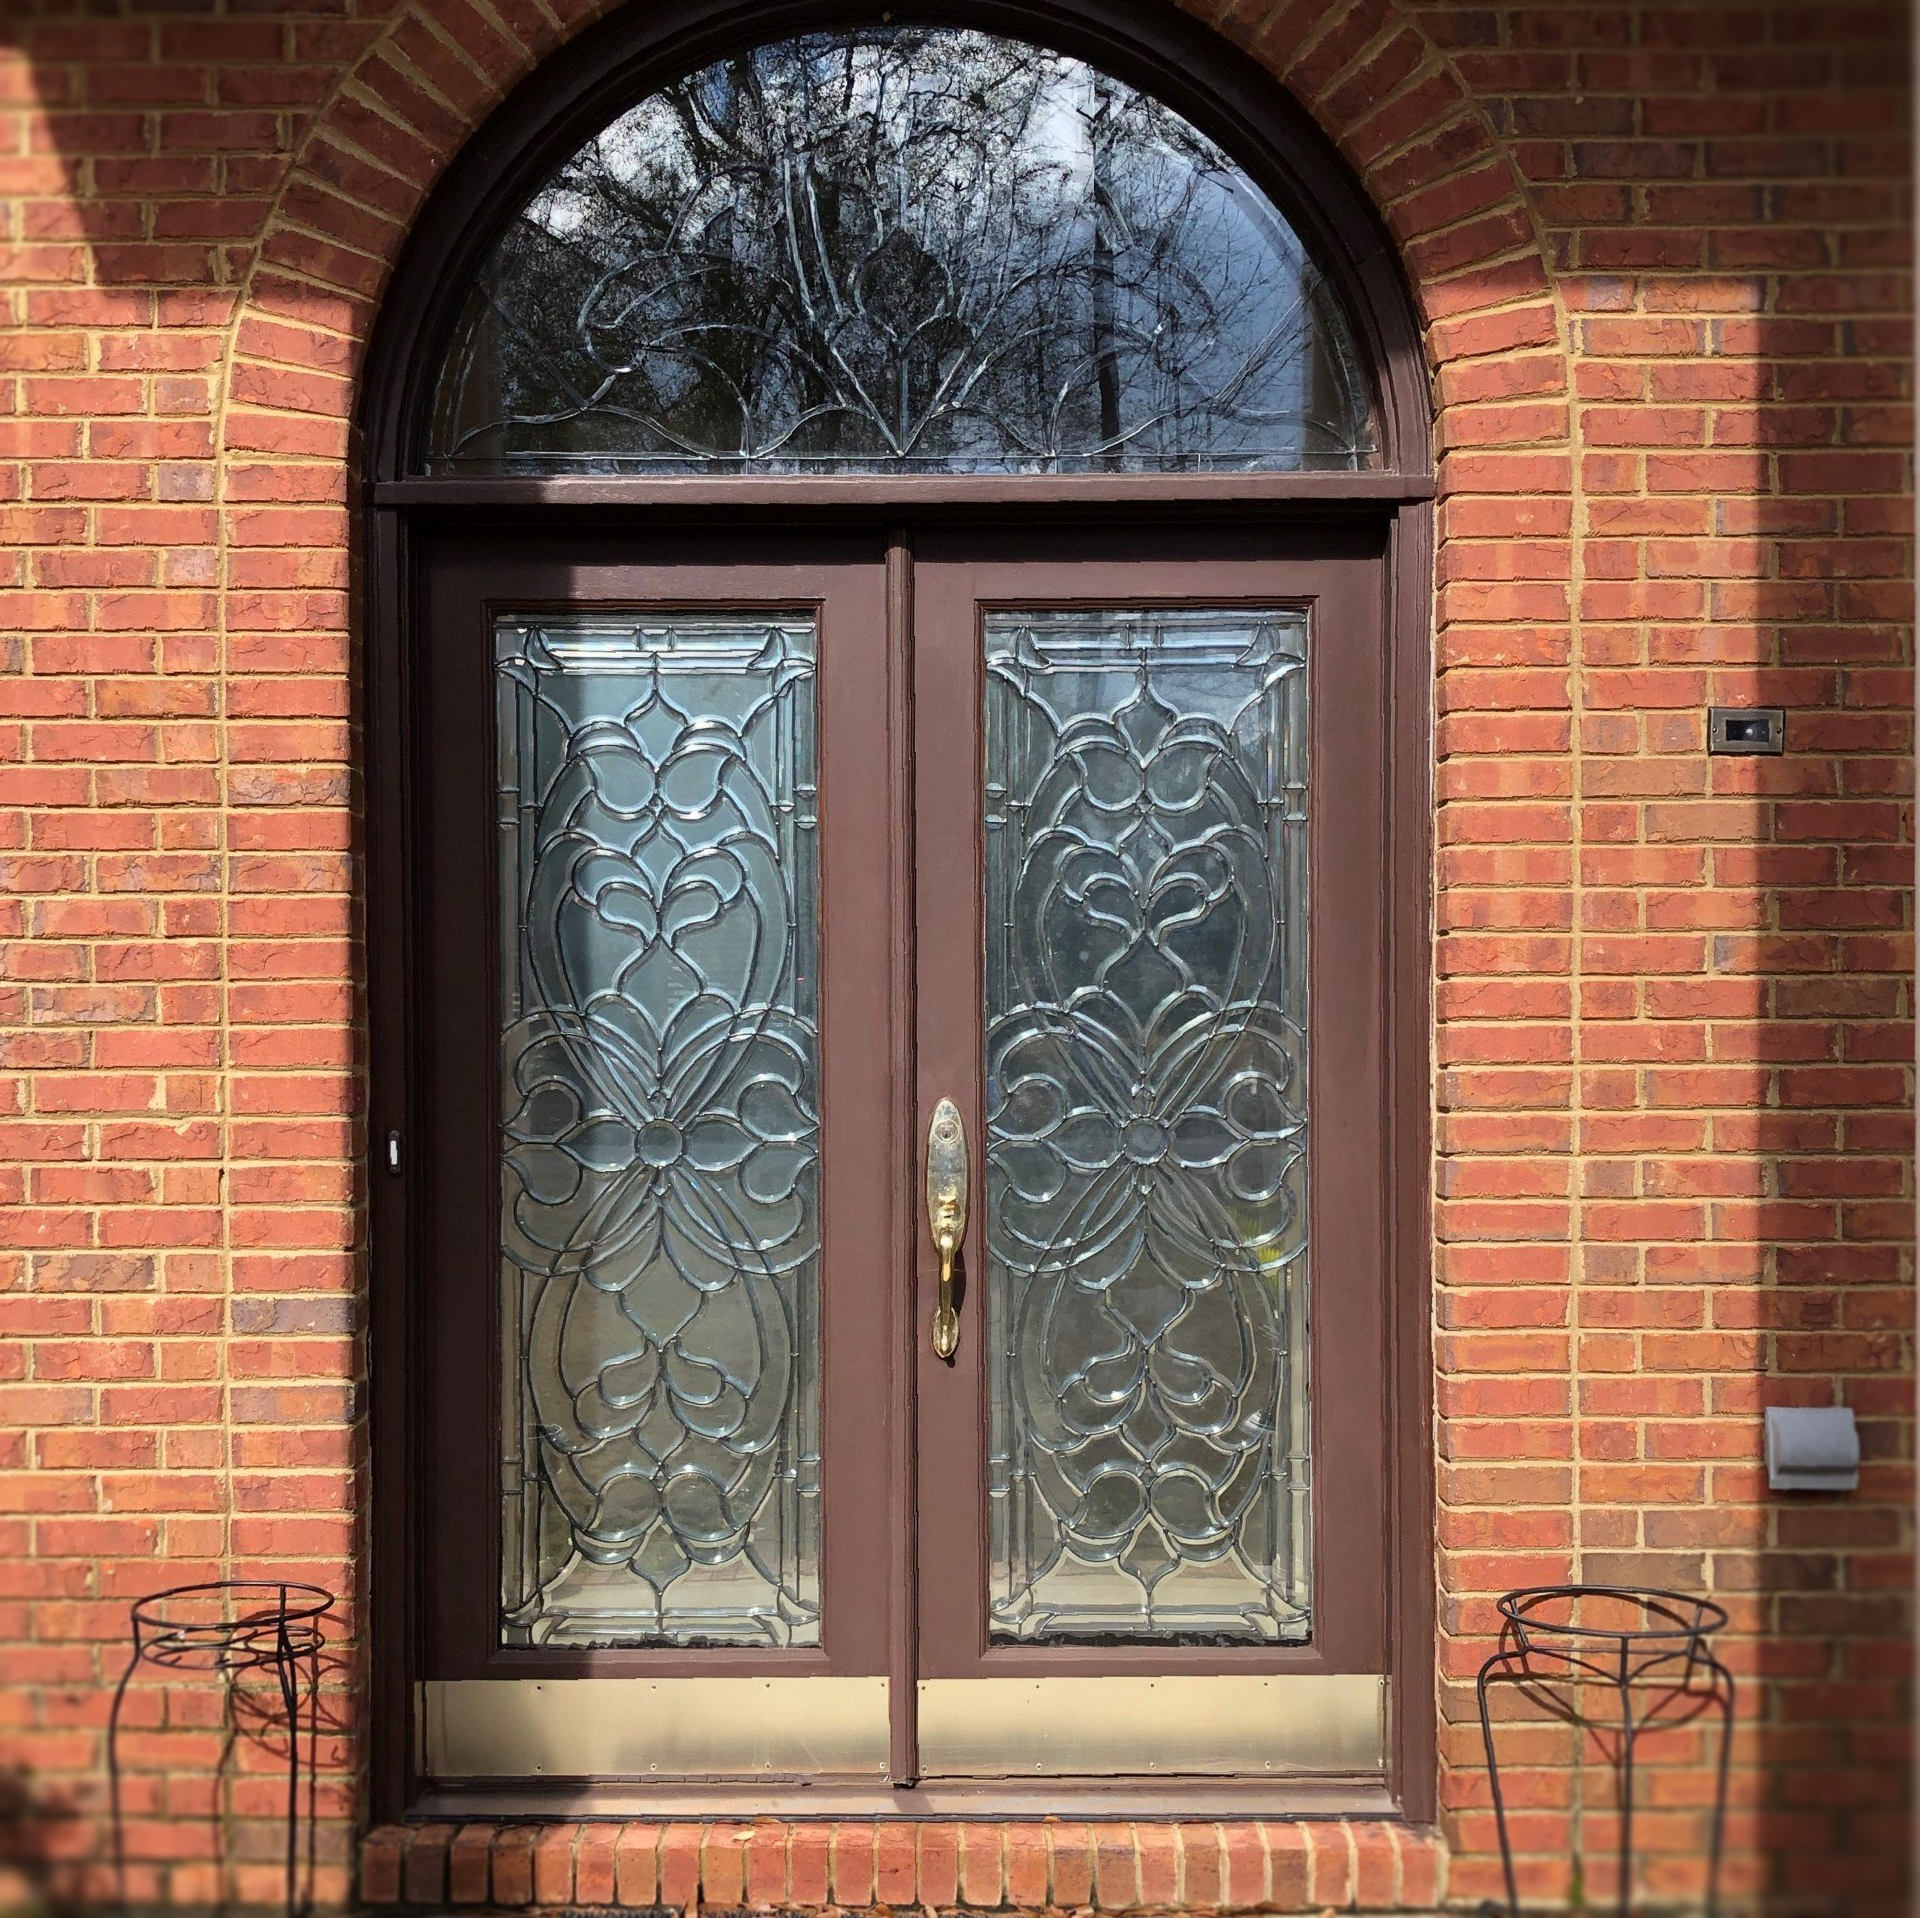 Professional residential window tinting service - home windows and glass doors 389 tinted on January 4, 2019